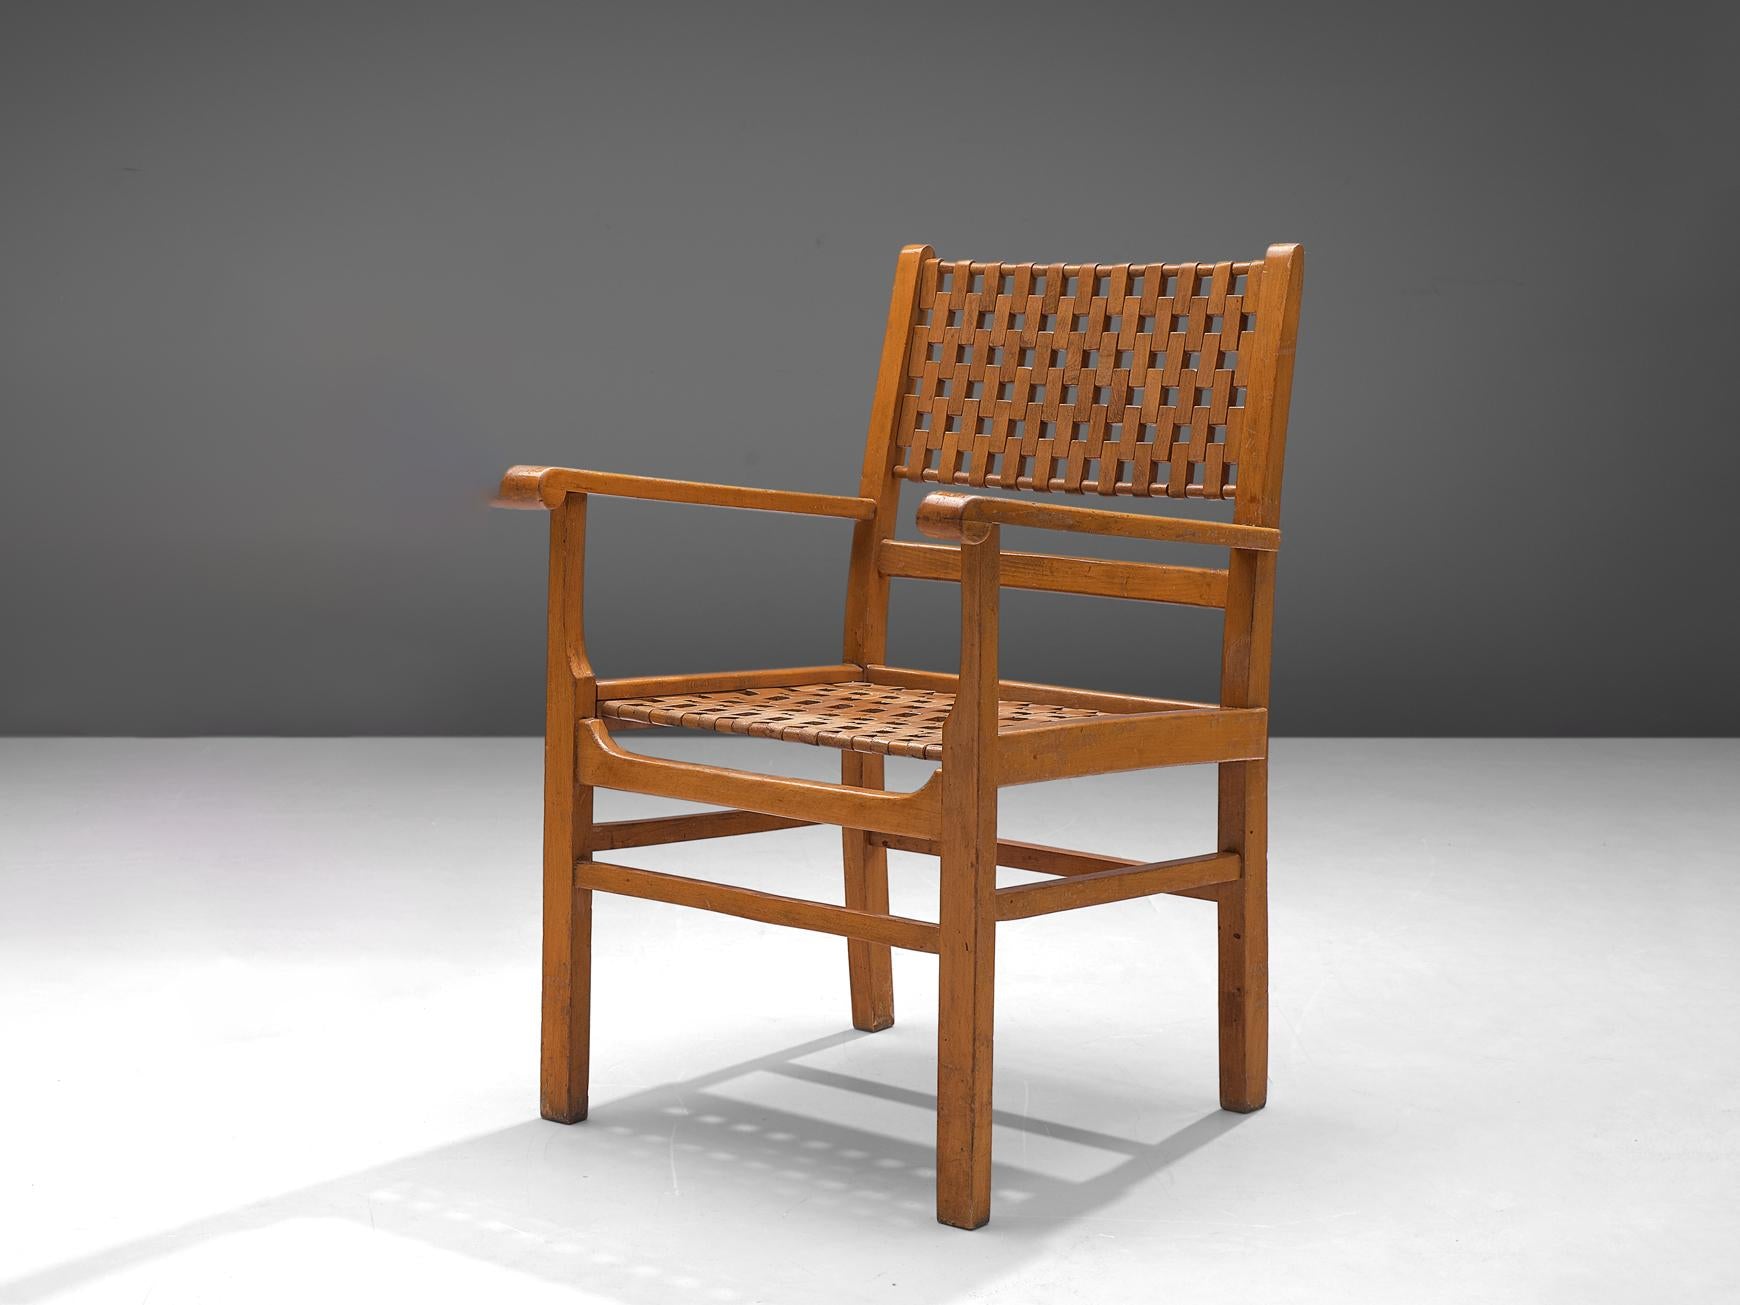 Armchair with Geometric Seat and Back in Blonde Wood